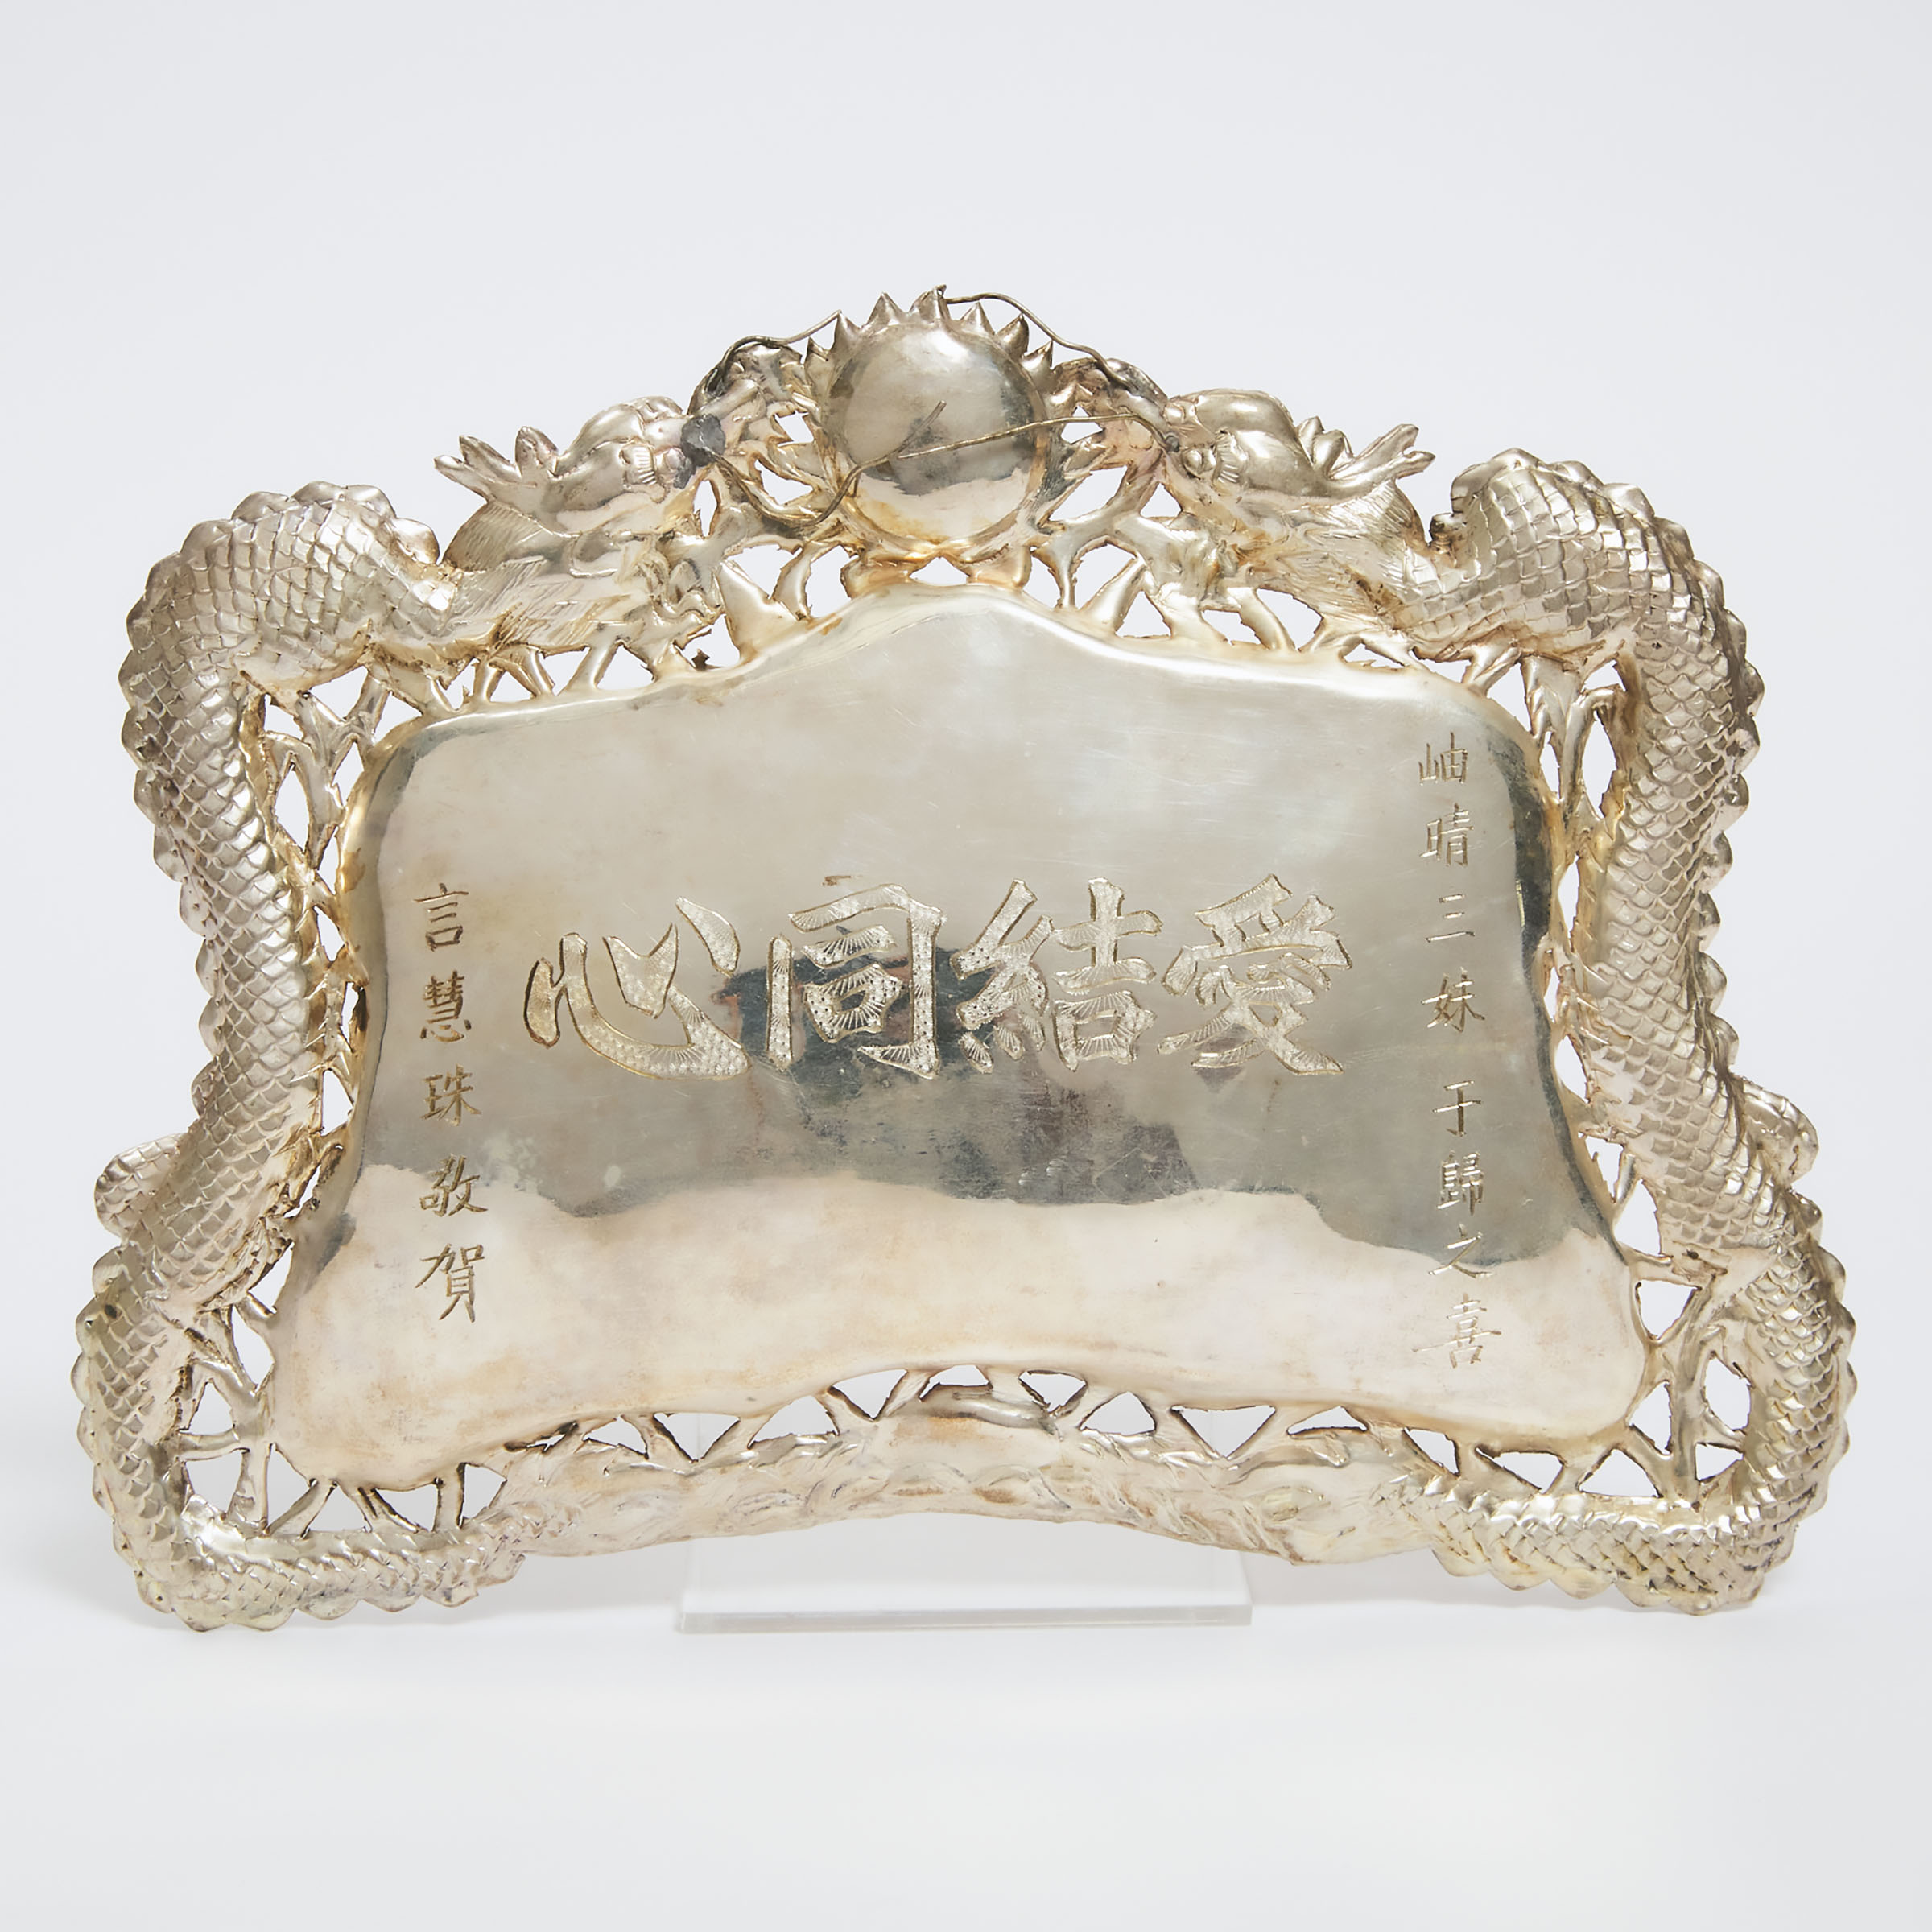 Two Chinese Silver Wedding Plaques, Circa 1940